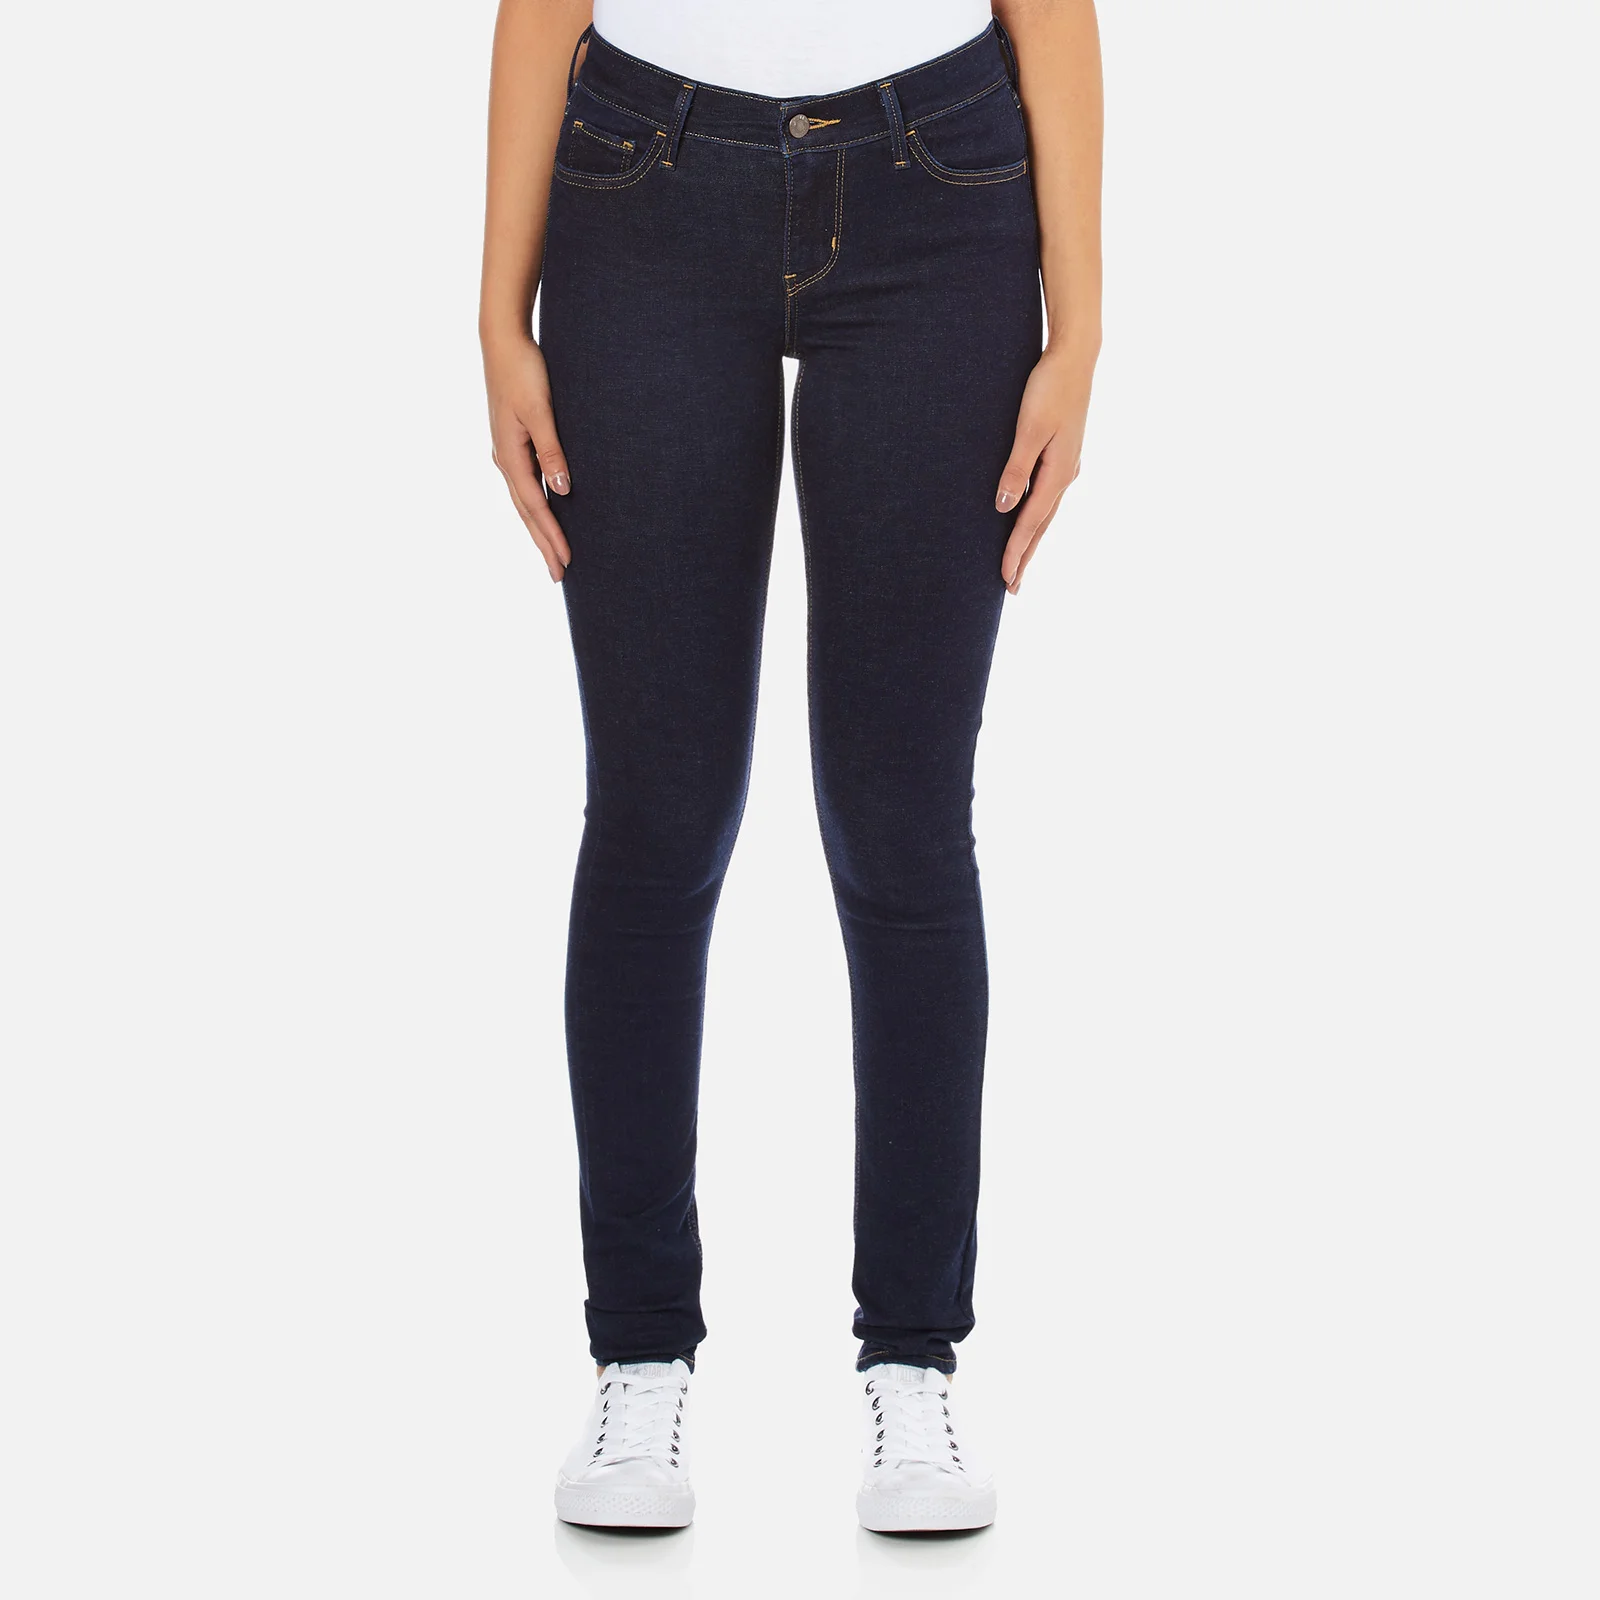 Levi's Women's Innovation Super Skinny Fit Jeans - High Society Image 1